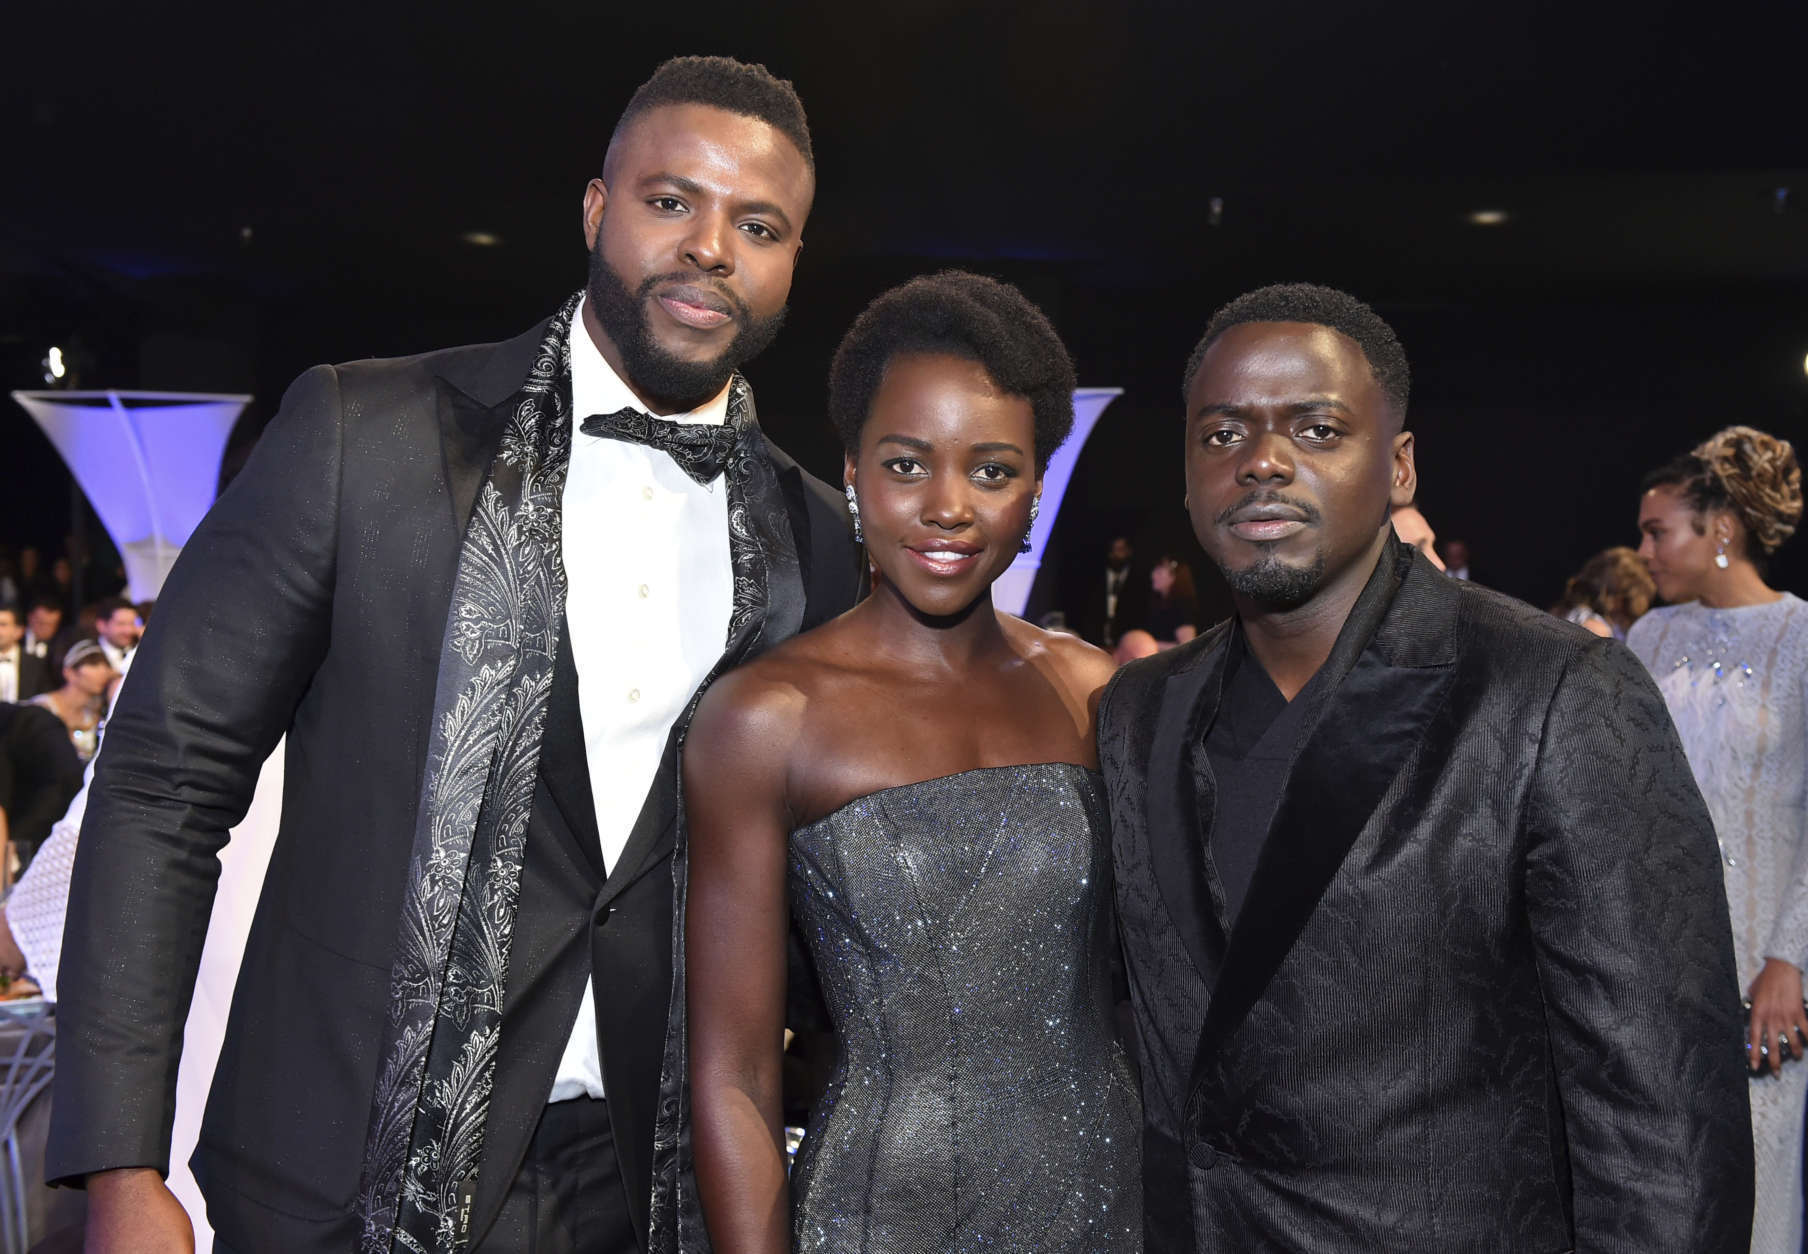 Winston Duke, from left, Lupita Nyong'o and Daniel Kaluuya pose in the audience at the 24th annual Screen Actors Guild Awards at the Shrine Auditorium &amp; Expo Hall on Sunday, Jan. 21, 2018, in Los Angeles. (Photo by Vince Bucci/Invision/AP)